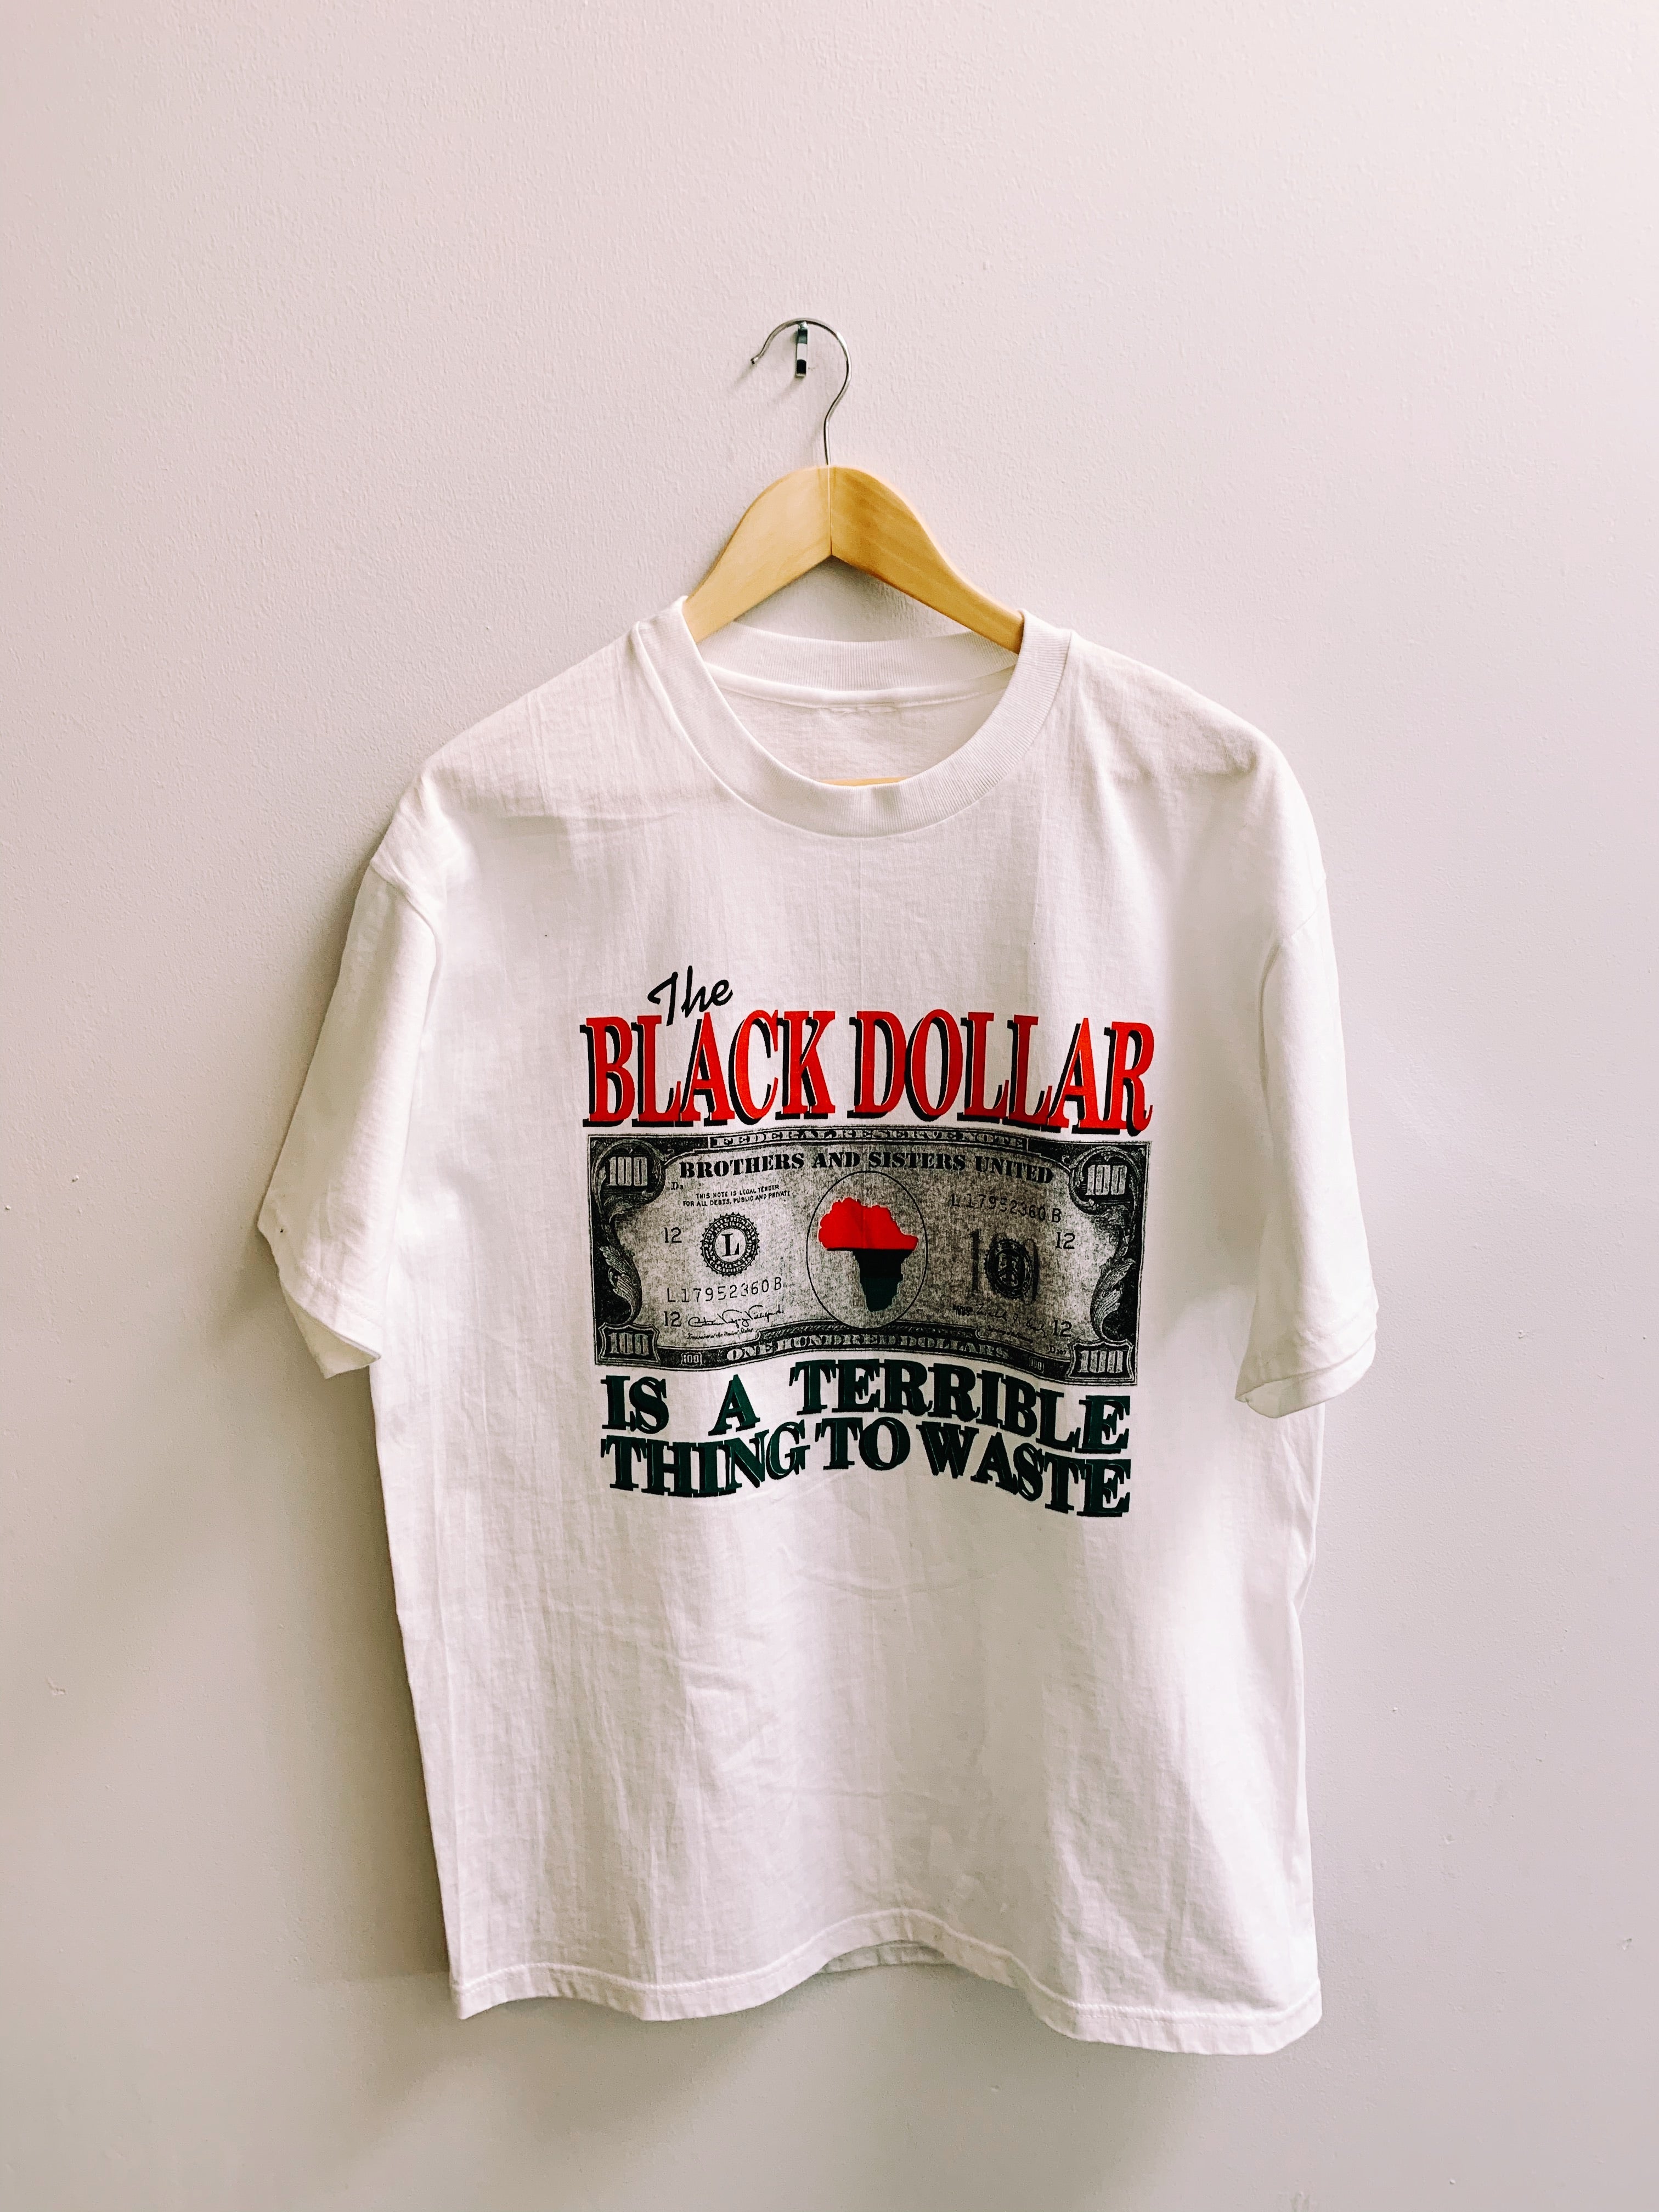 Vintage “The Black Dollar is a terrible thing to waste” 1990’s Tee shirt